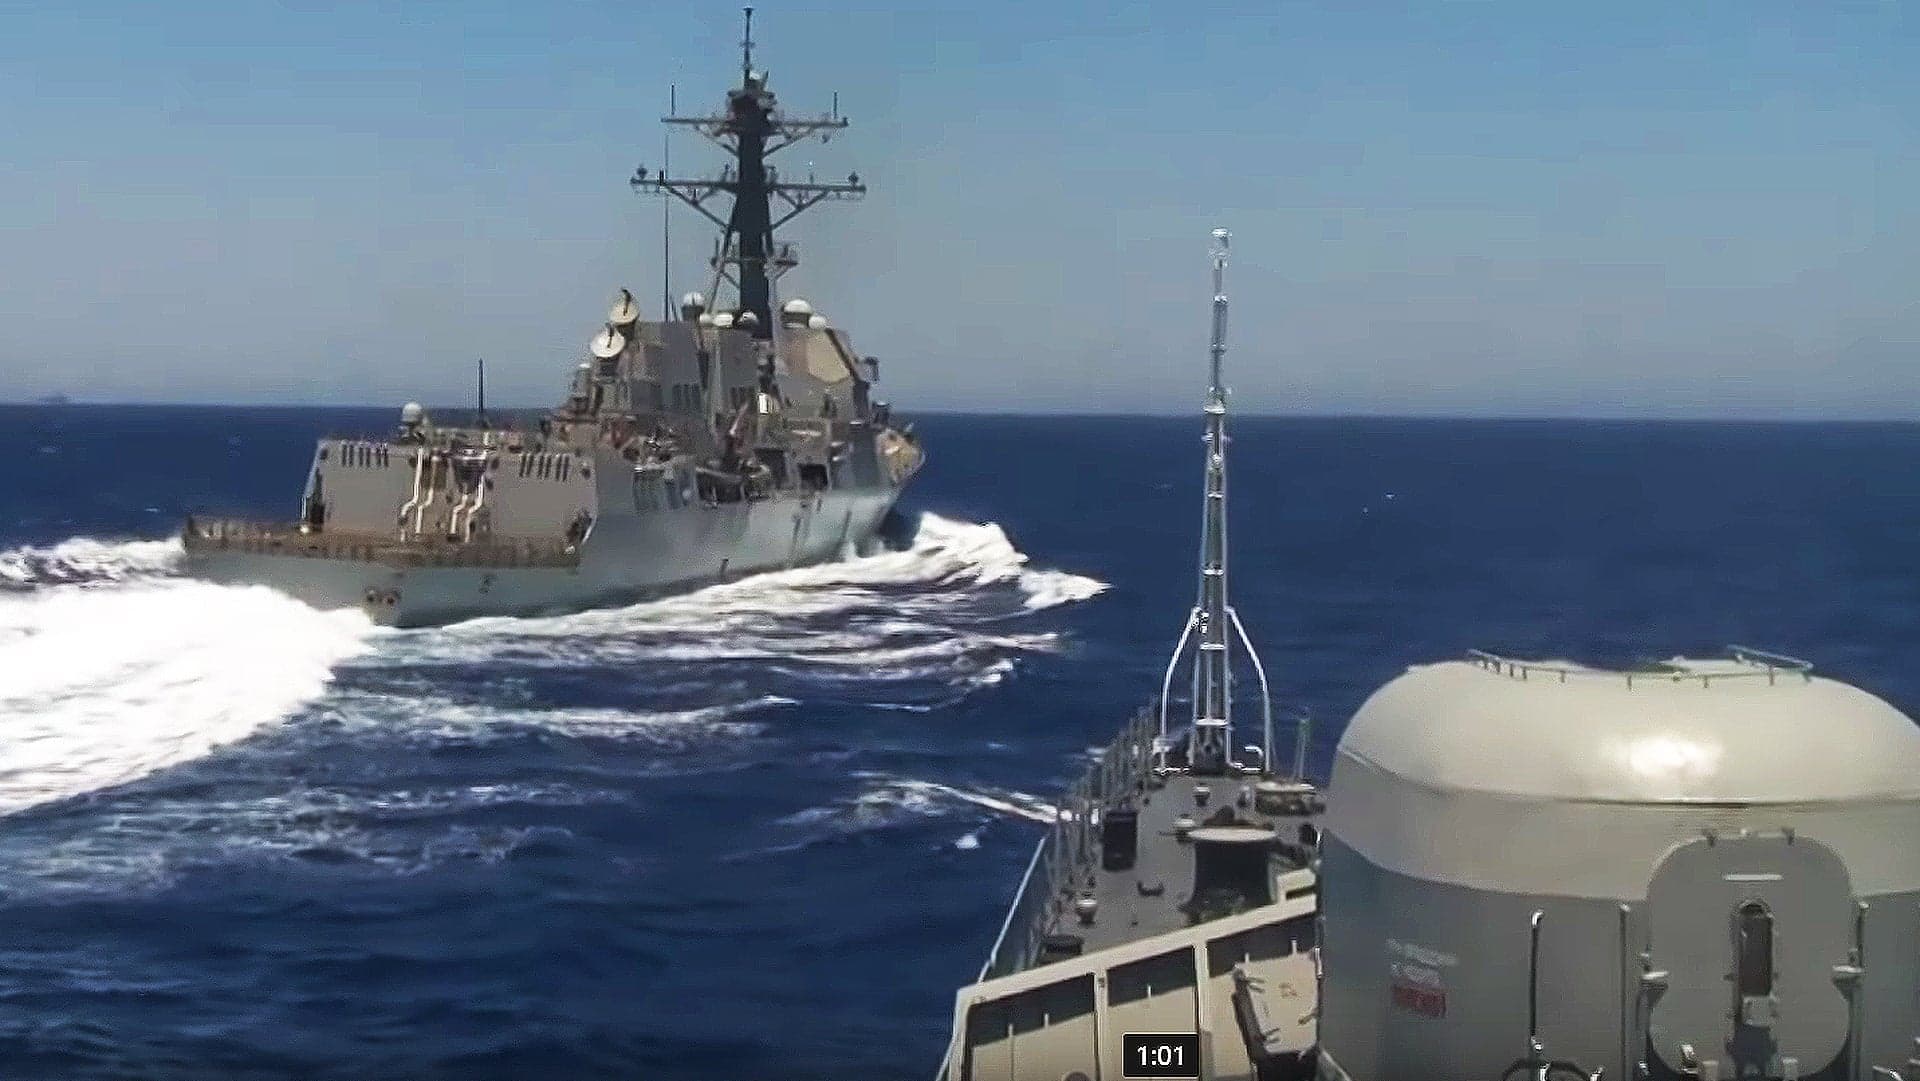 US and Russian Navy Warships Have A Close Encounter In The Eastern Mediterranean Sea